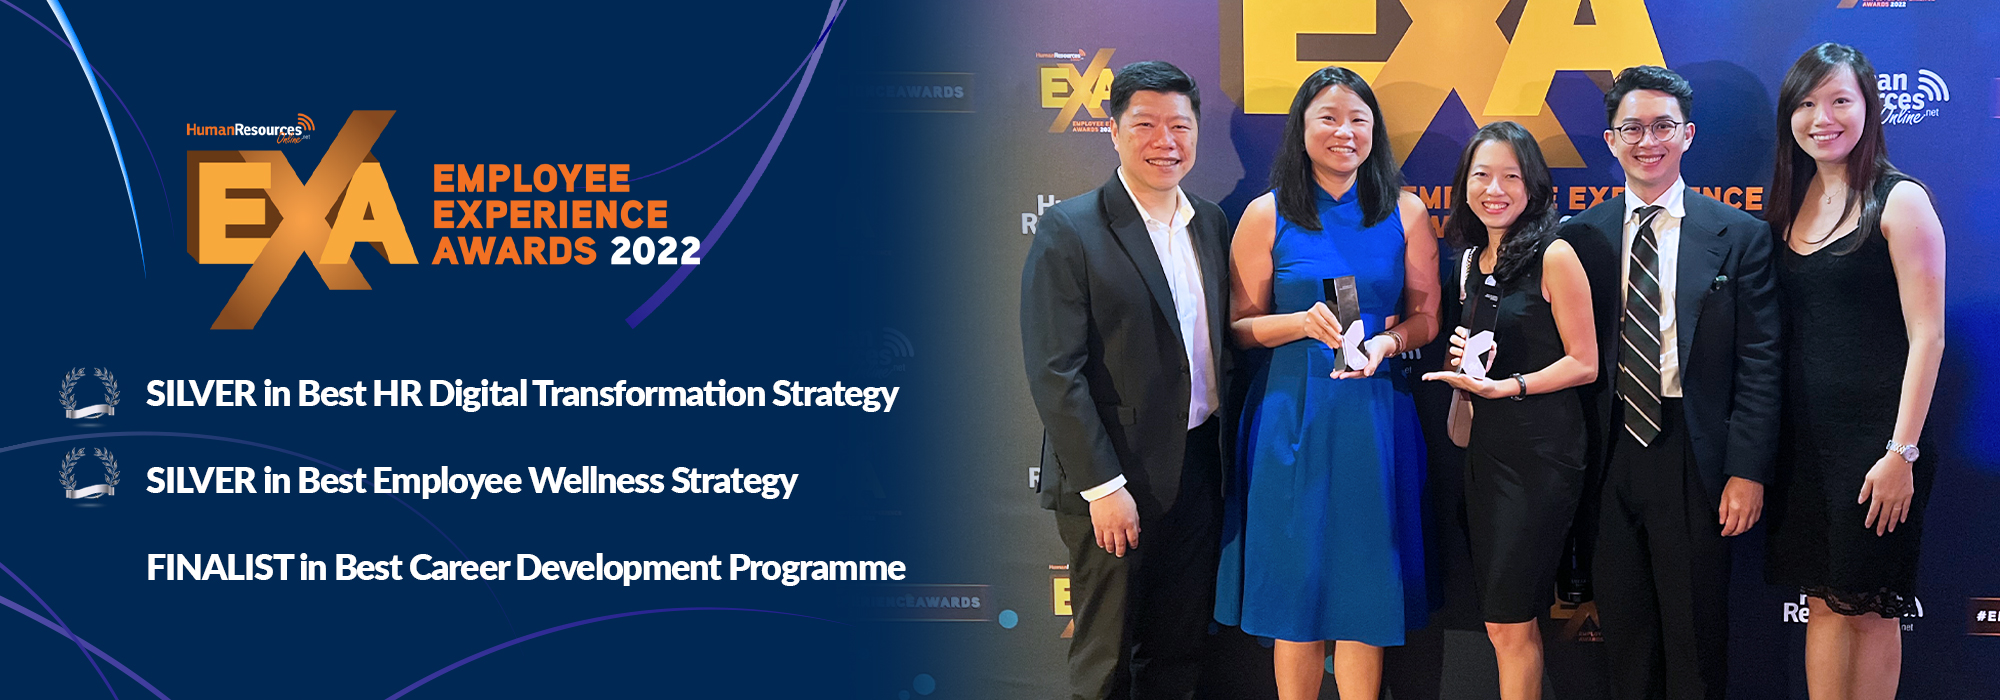 Certis Wins at Employee Experience Awards 2022